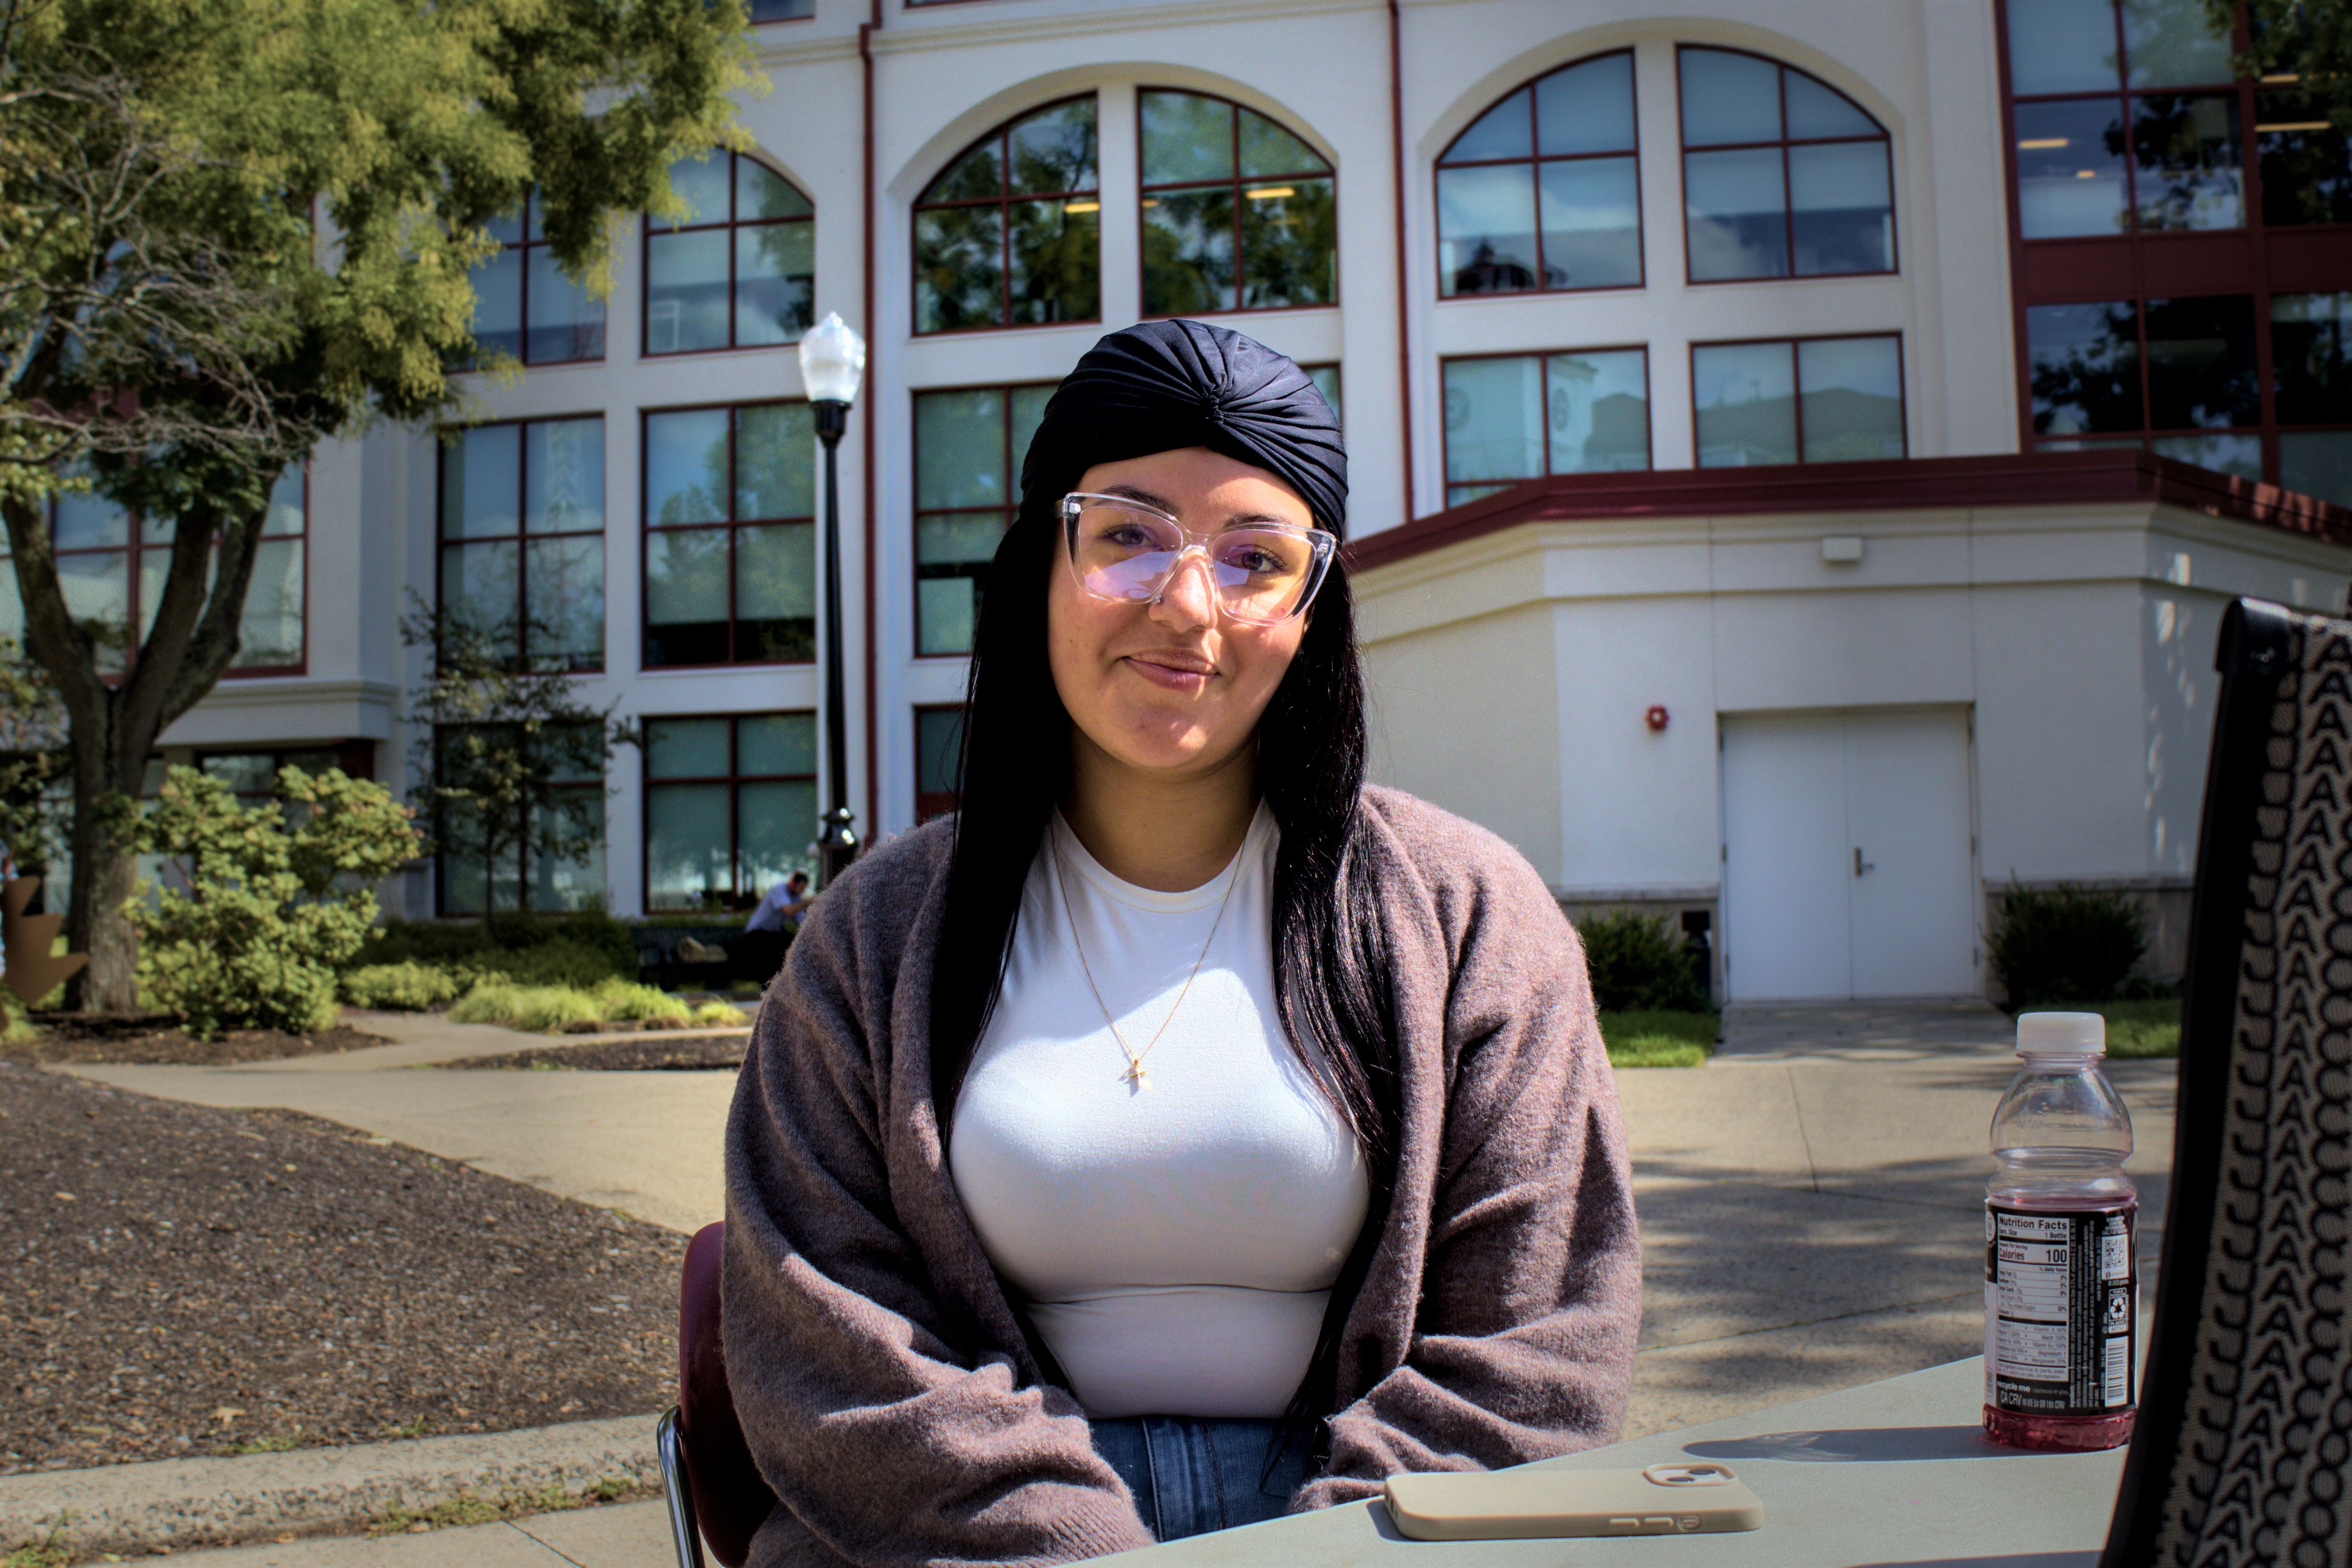 Girl with a blue headwrap and clear glasses sits in front of a building. Her black hair goes down to her chest. She is wearing a white shirt with blue jeans, covered by a gray sweater.